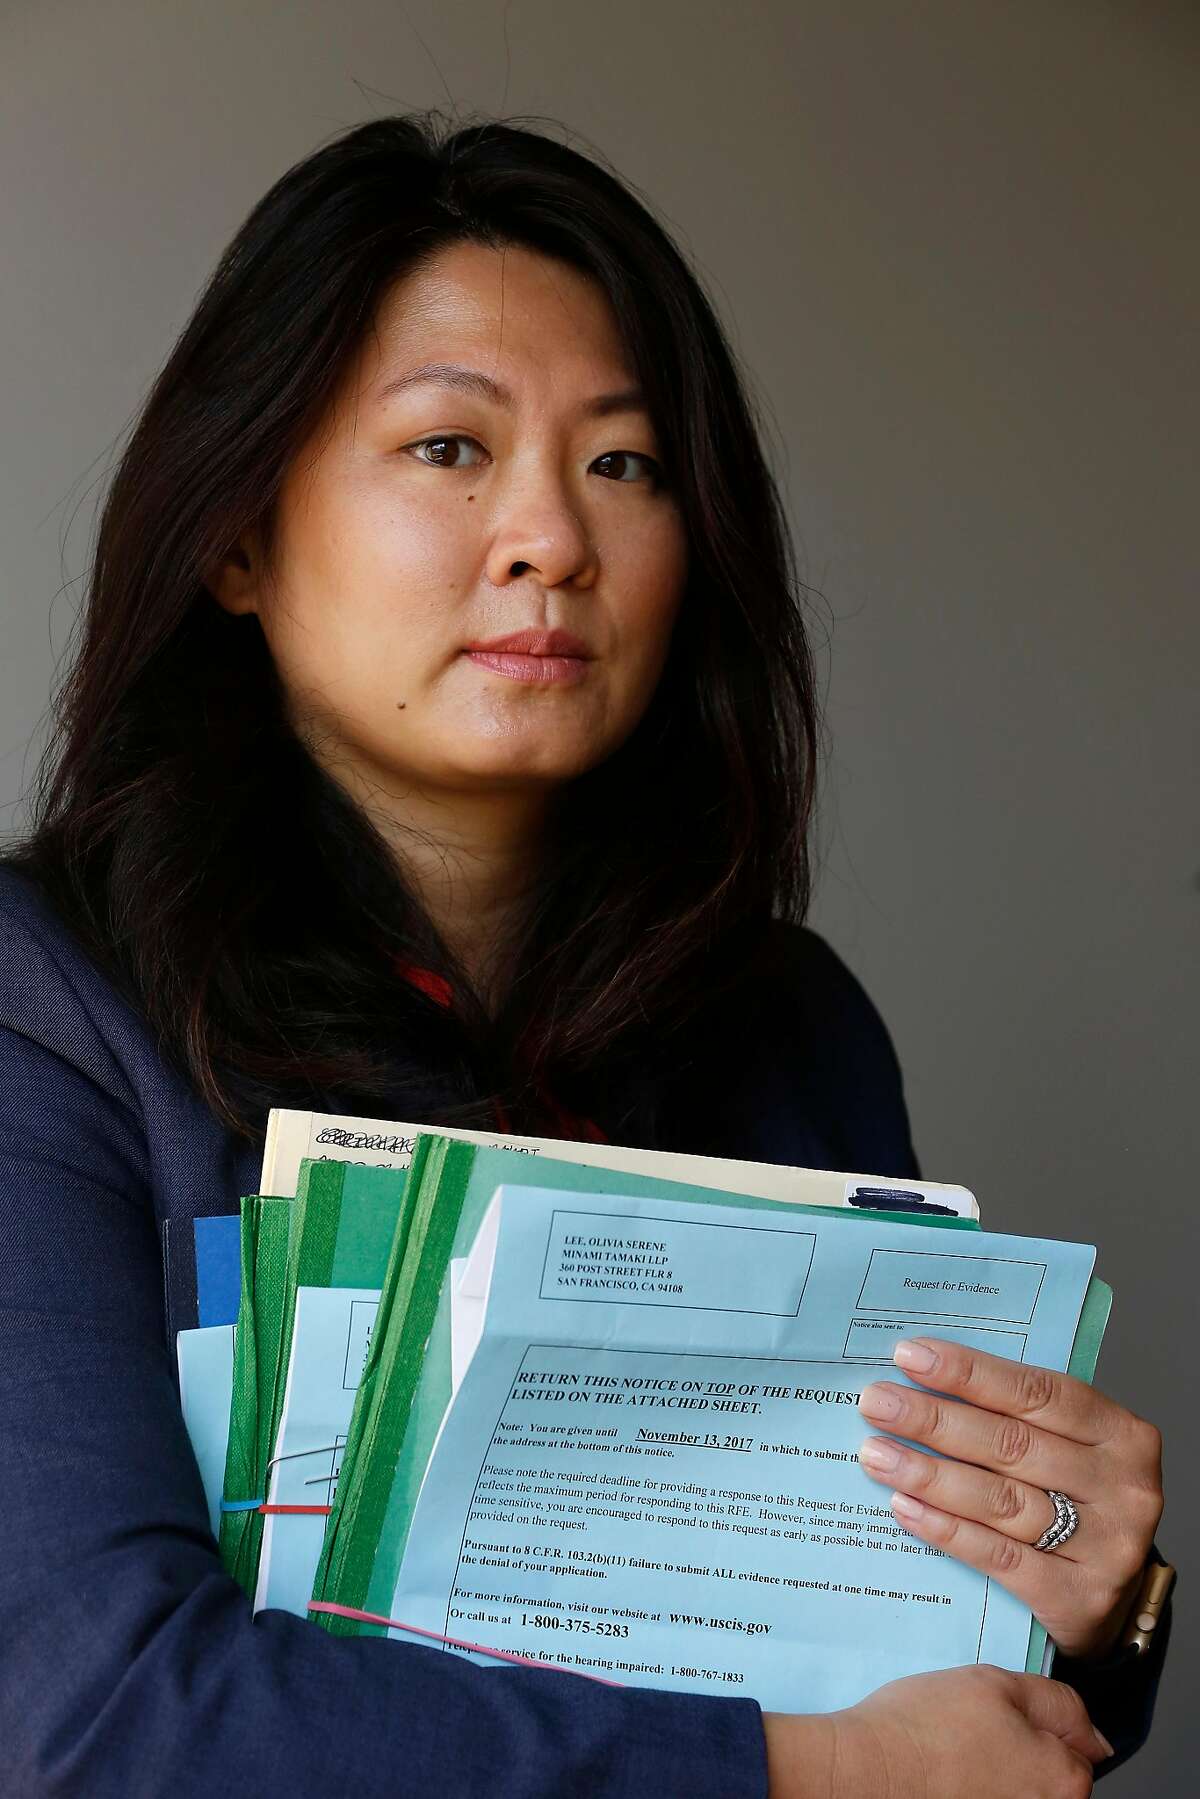 Olivia Lee, senior associate Minami Tamaki LLP, holds "Requests for Evidence" from immigration officials for some of her clients cases as she stands for a portrait in her office on Monday, August 28, 2017 in San Francisco, Calif.